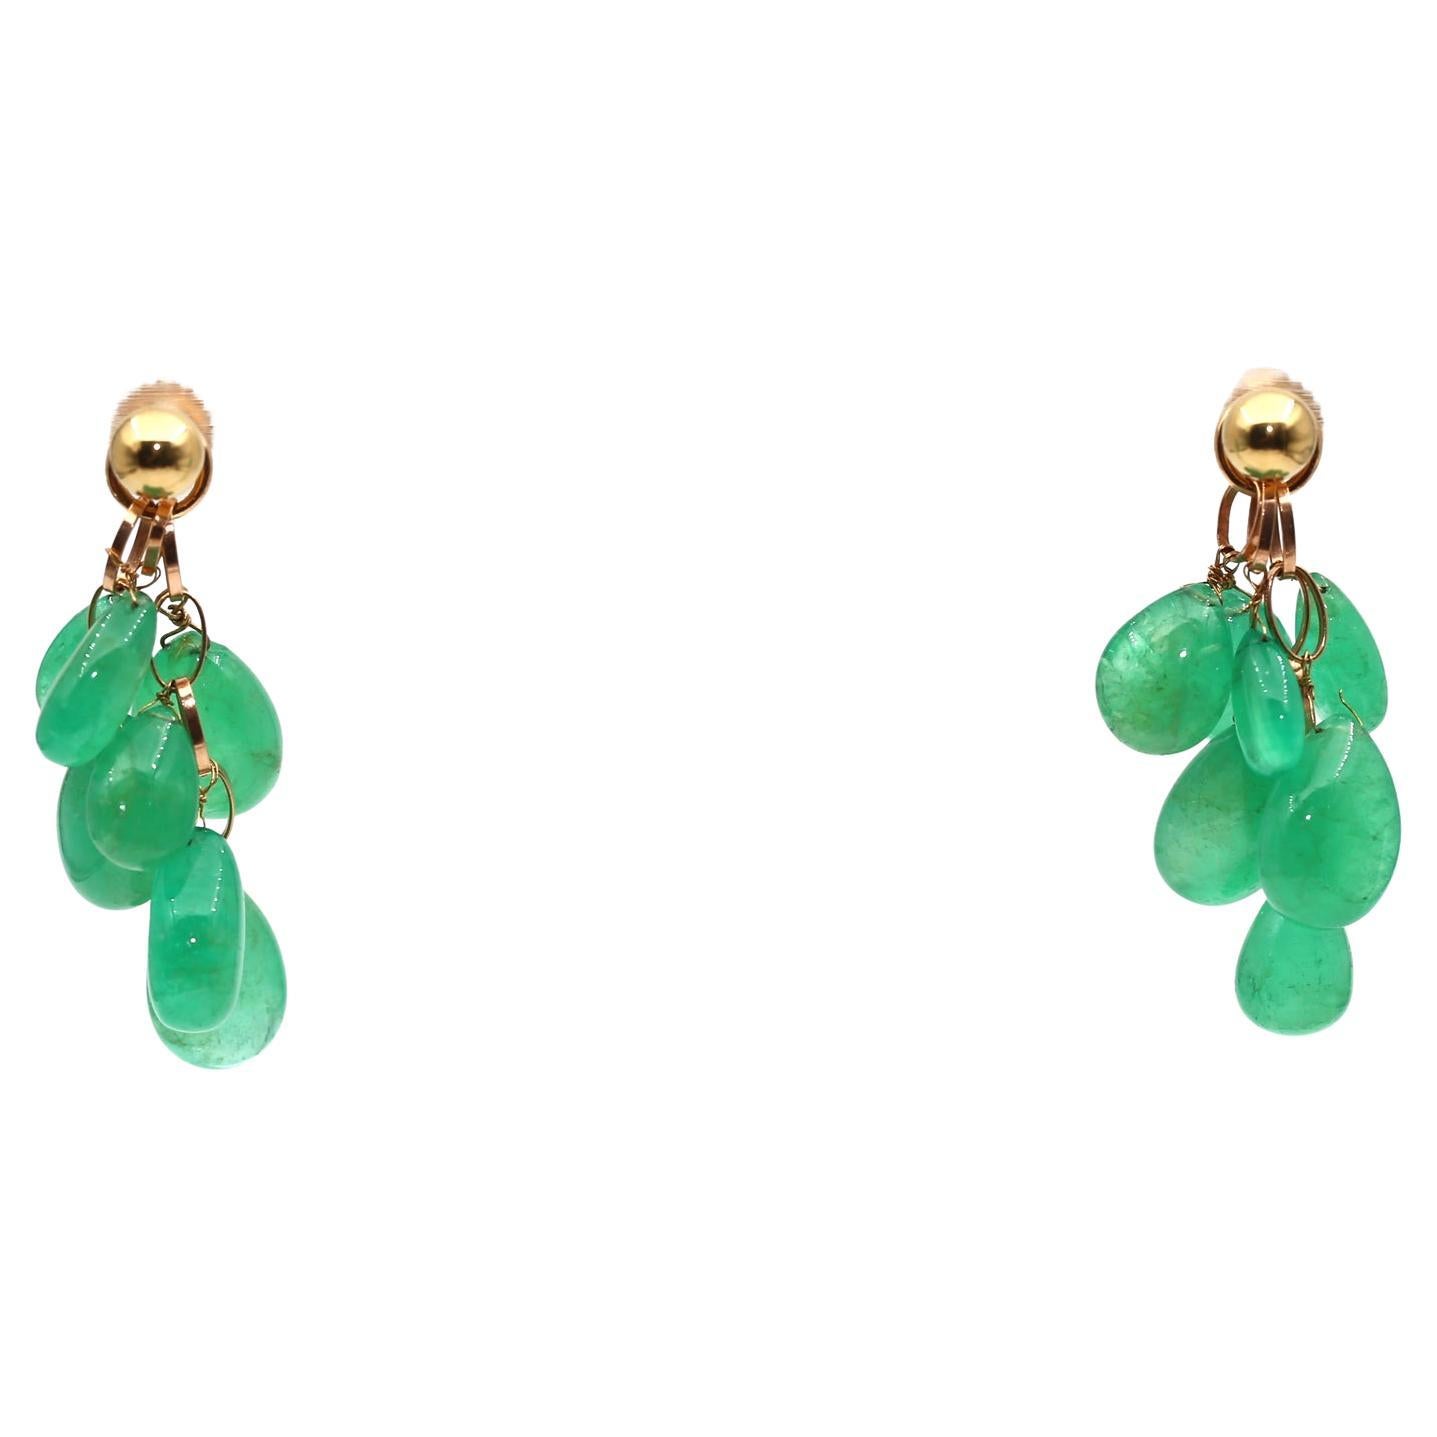 70 Carats Emerald Pear-Shaped Gold Earrings, 1955 For Sale